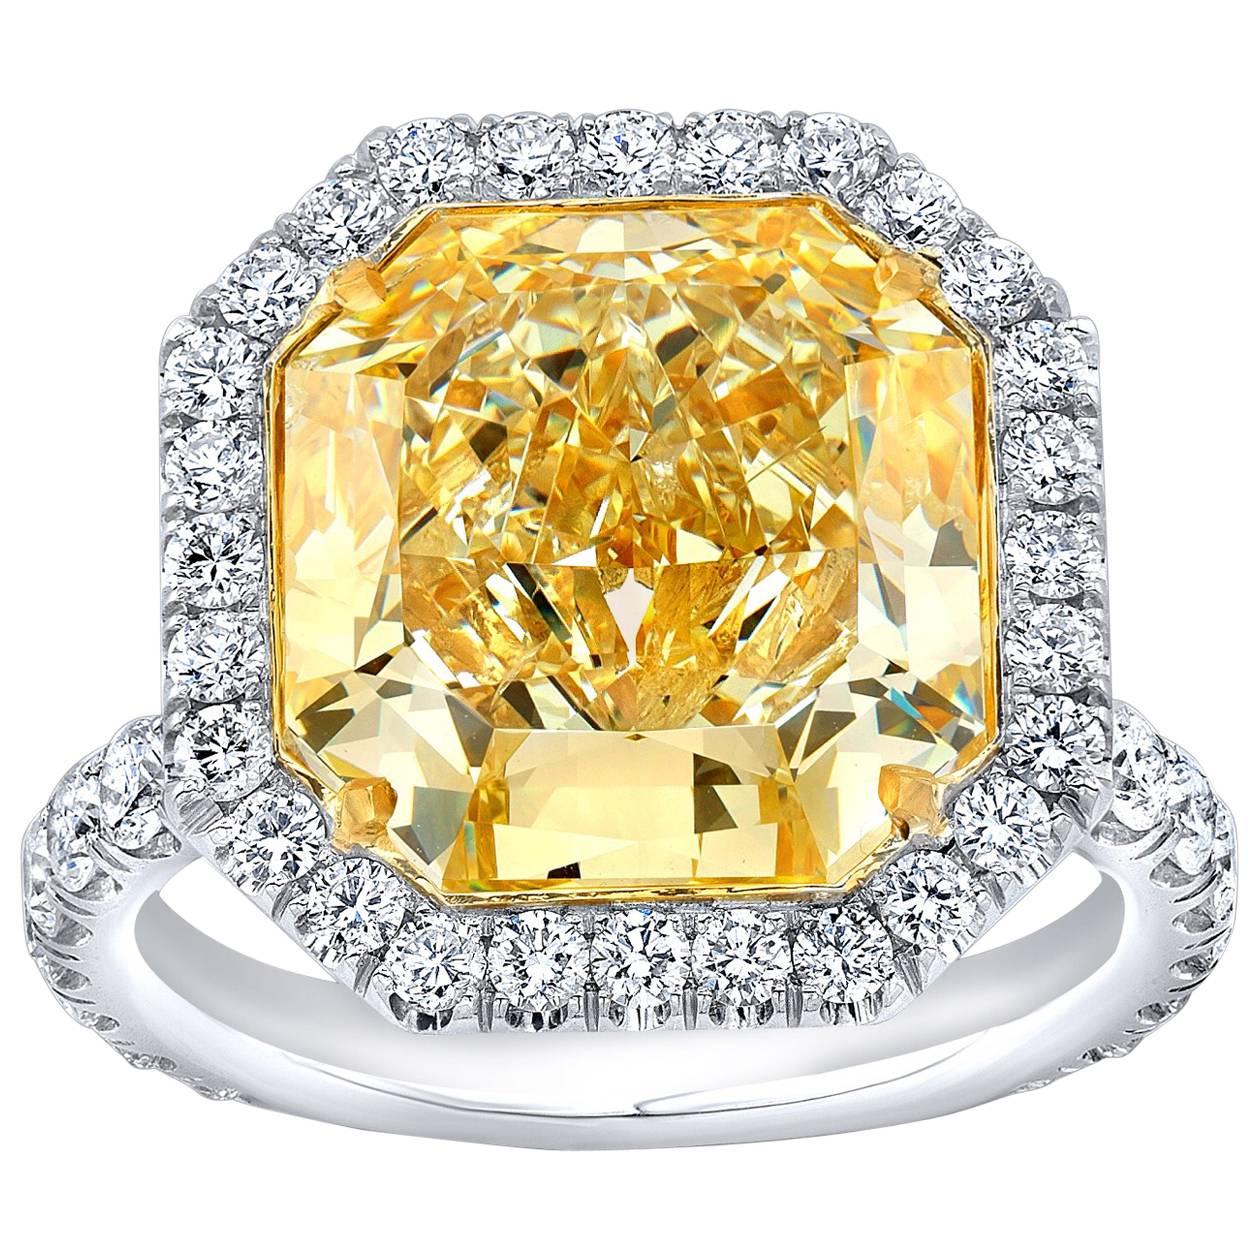 Canary Fancy Light Yellow Diamond Ring Radiant Cut GIA Certified 10.43 Carat 